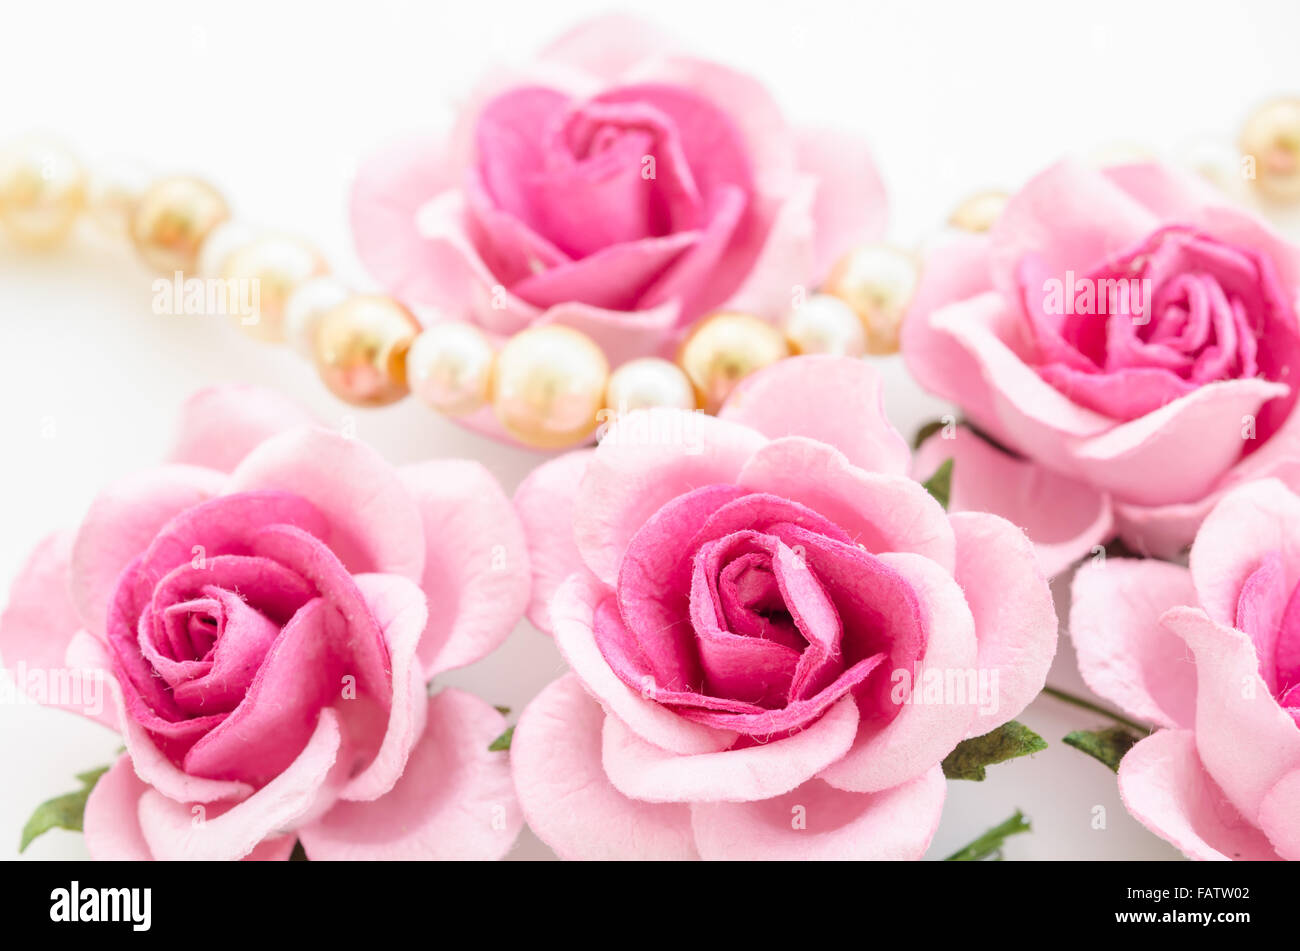 Pink rose with pearls on white background. Stock Photo